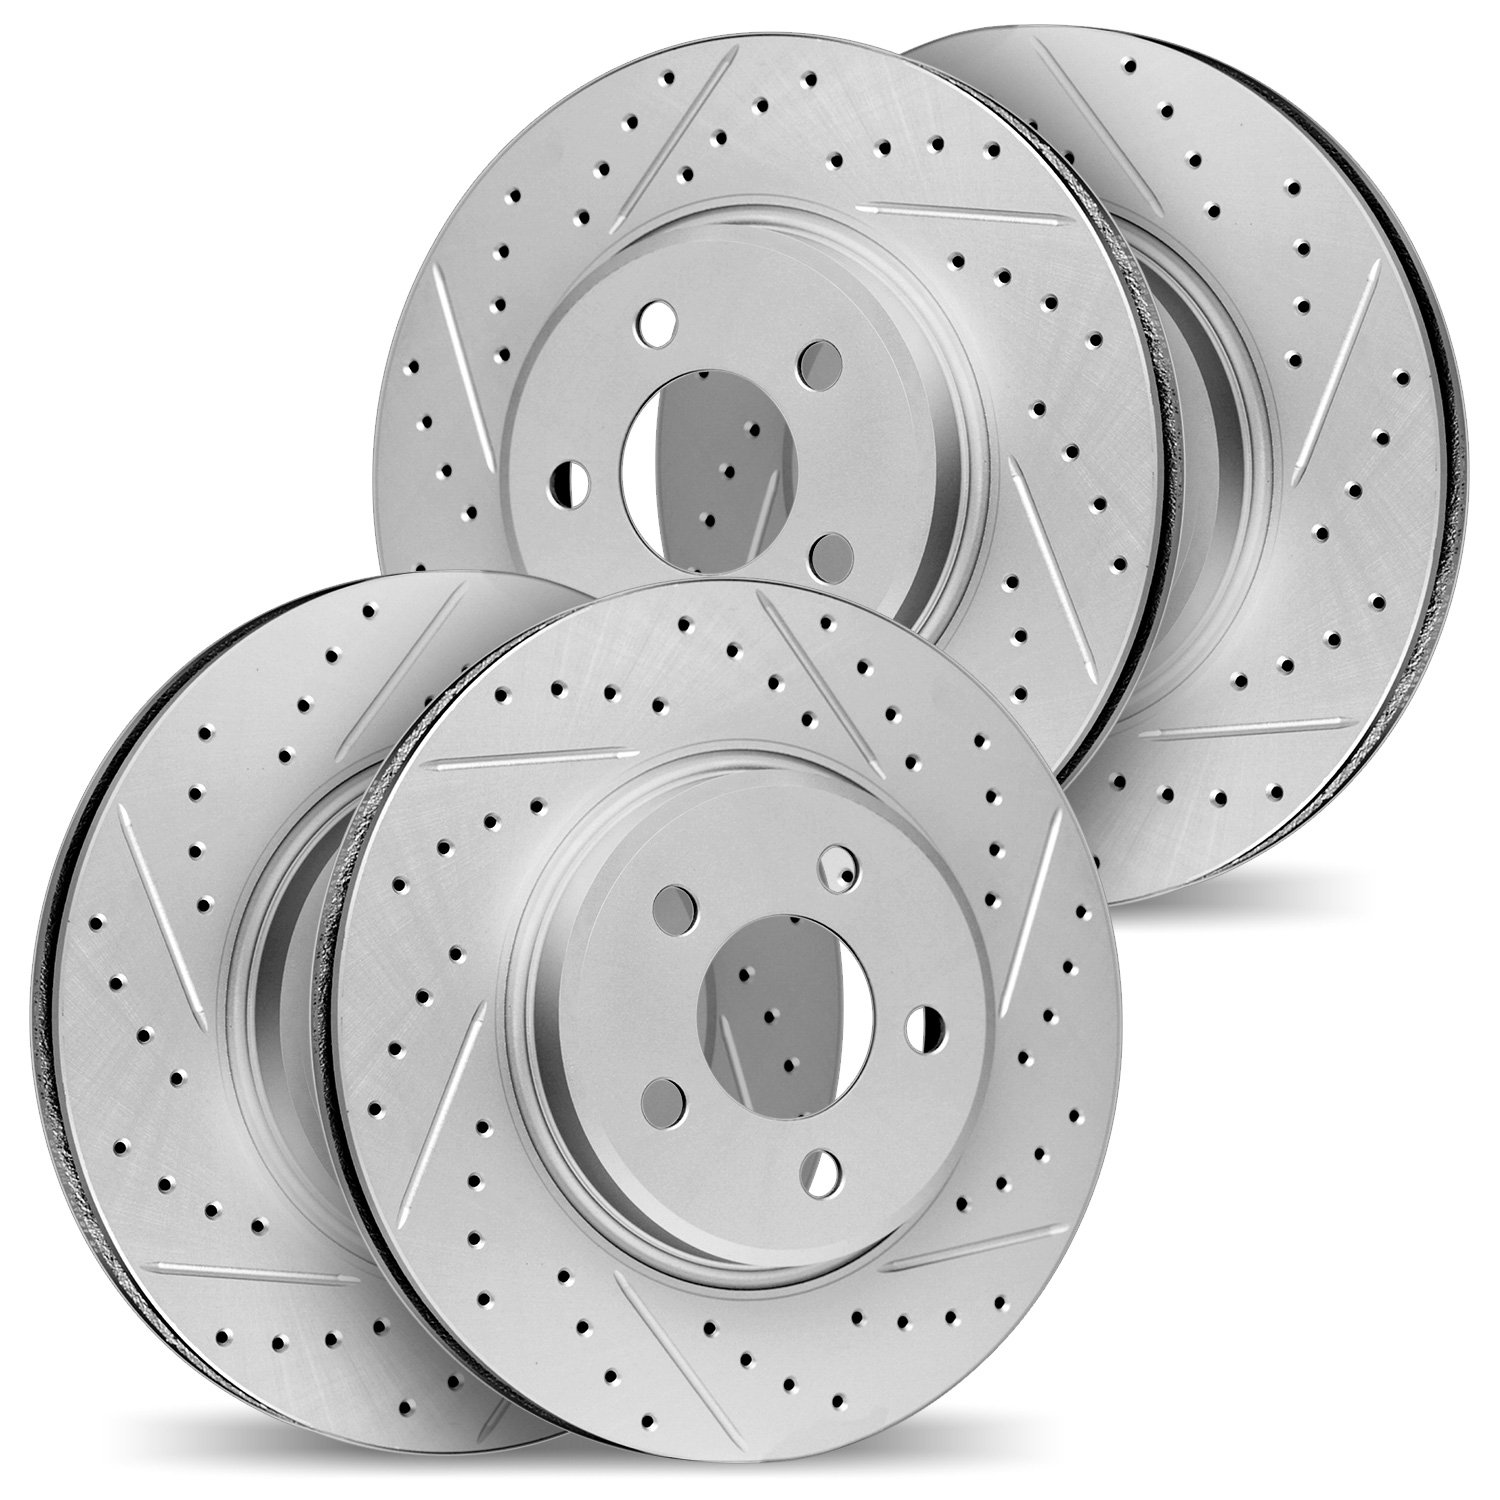 2004-47038 Geoperformance Drilled/Slotted Brake Rotors, 1963-1982 GM, Position: Front and Rear